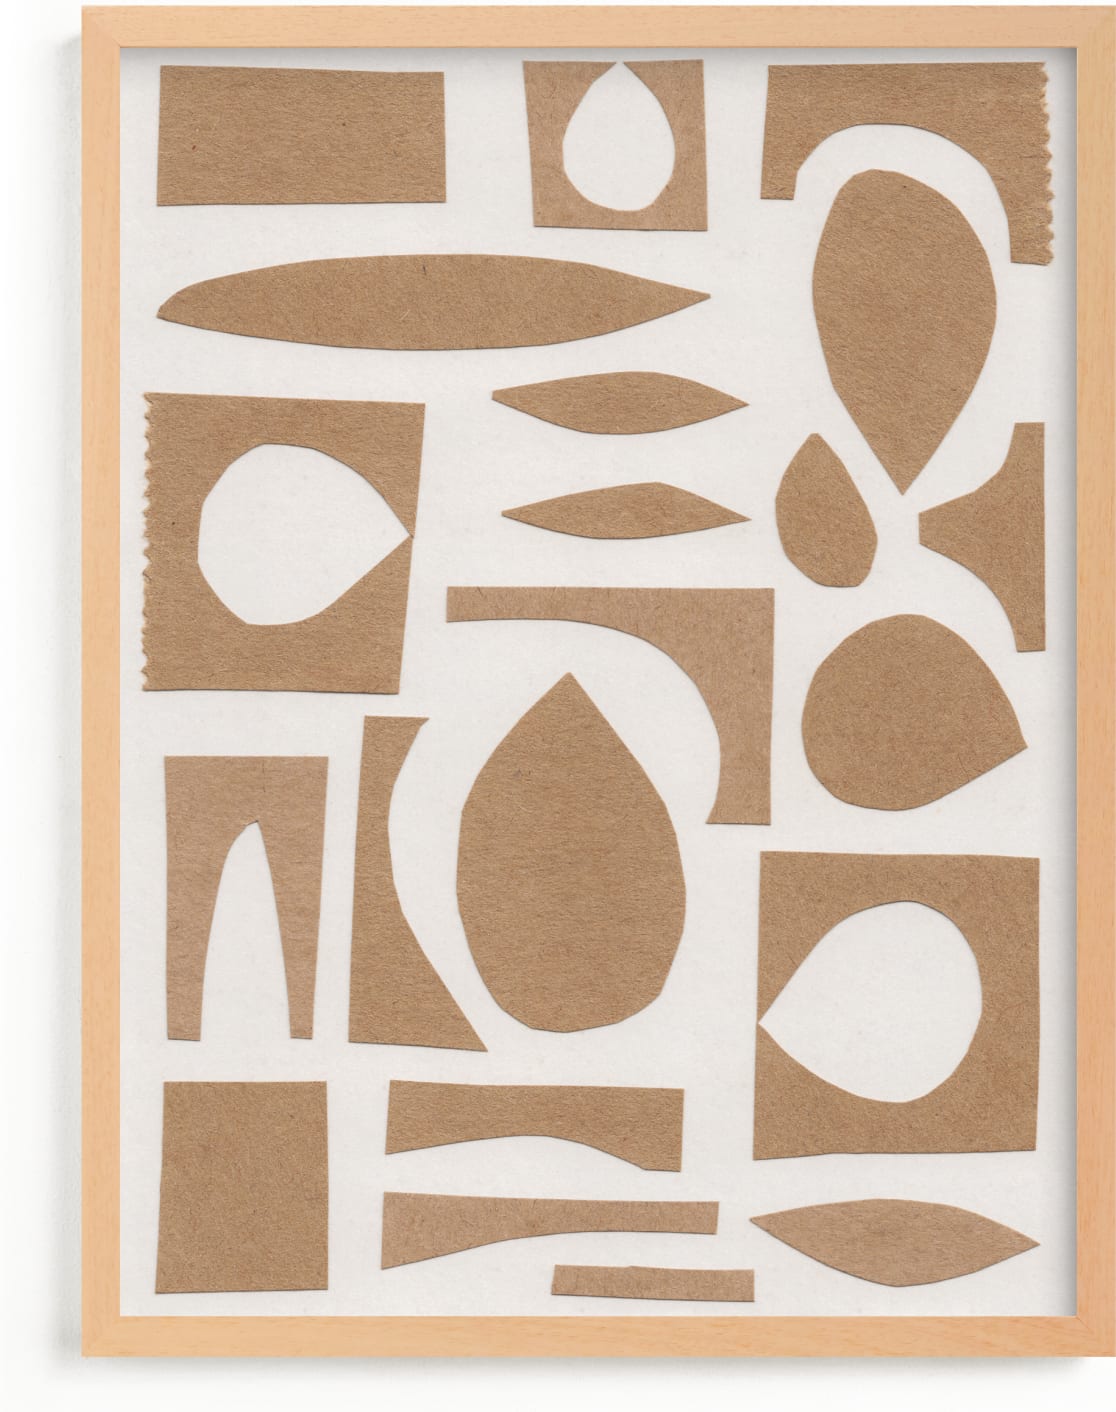 This is a brown, beige art by Alisa Galitsyna called Paper Cut-outs.